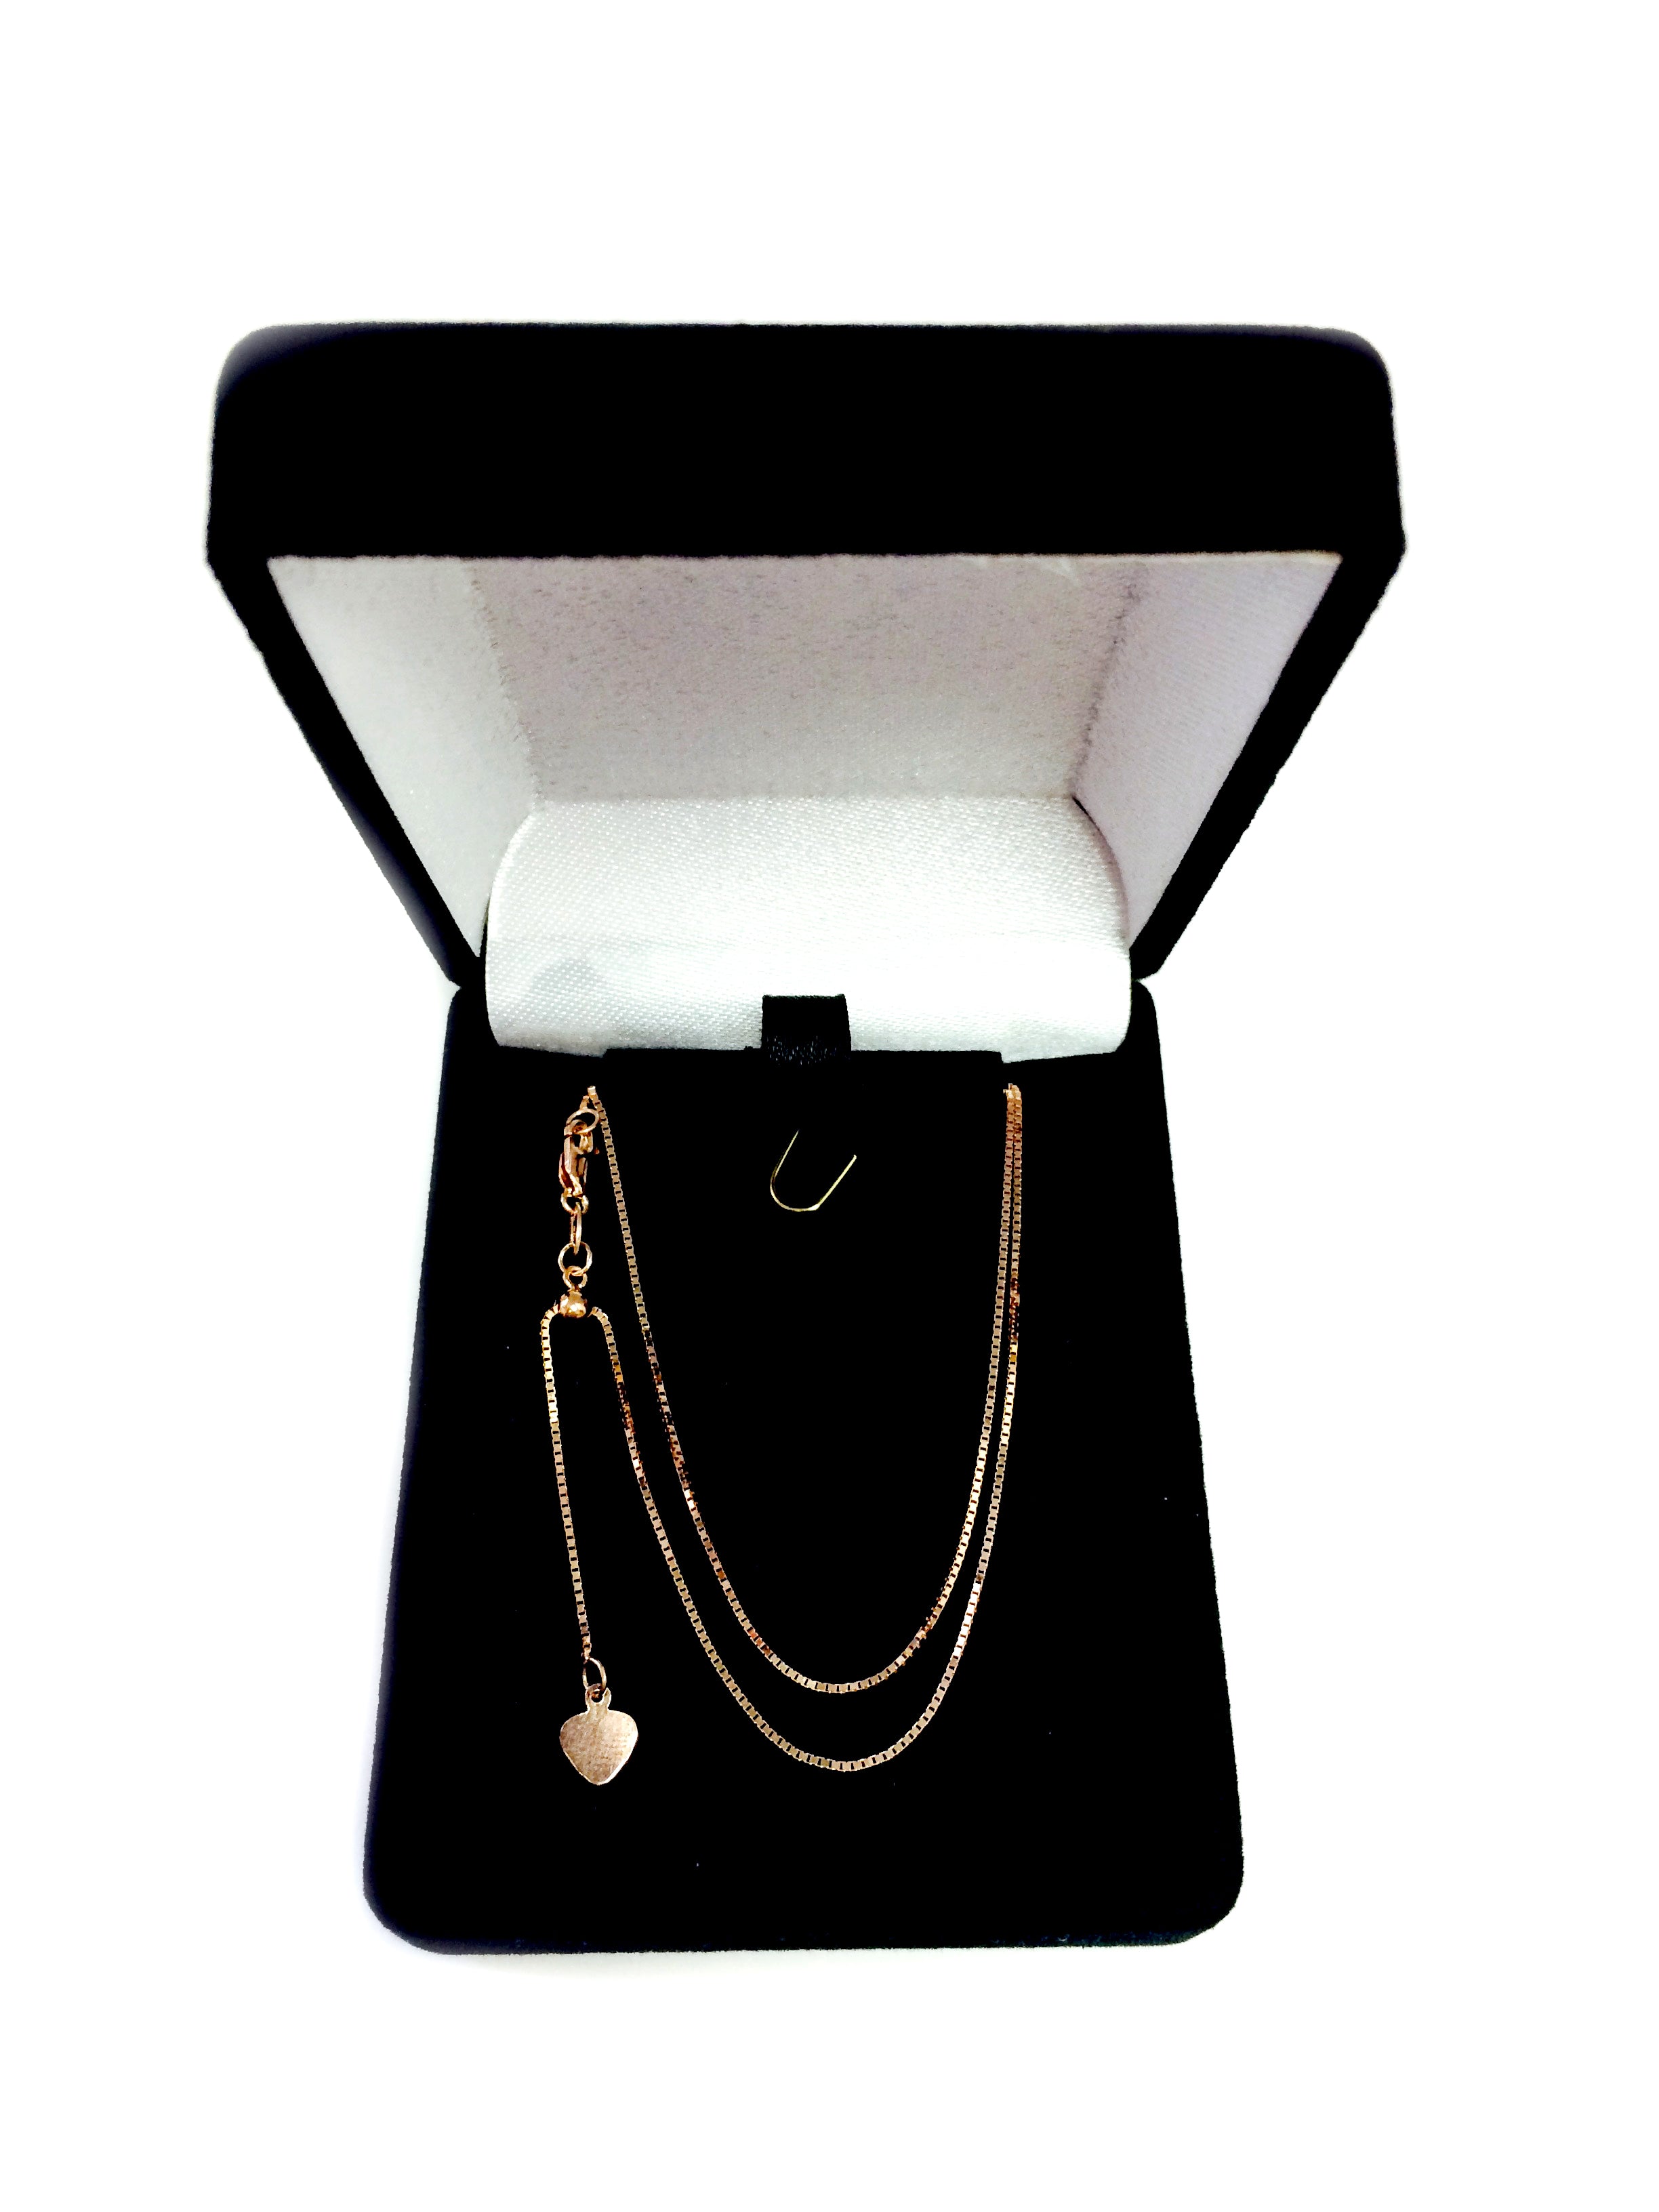 14k Rose Gold Adjustable Box Chain Necklace, 0.7mm, 22" fine designer jewelry for men and women